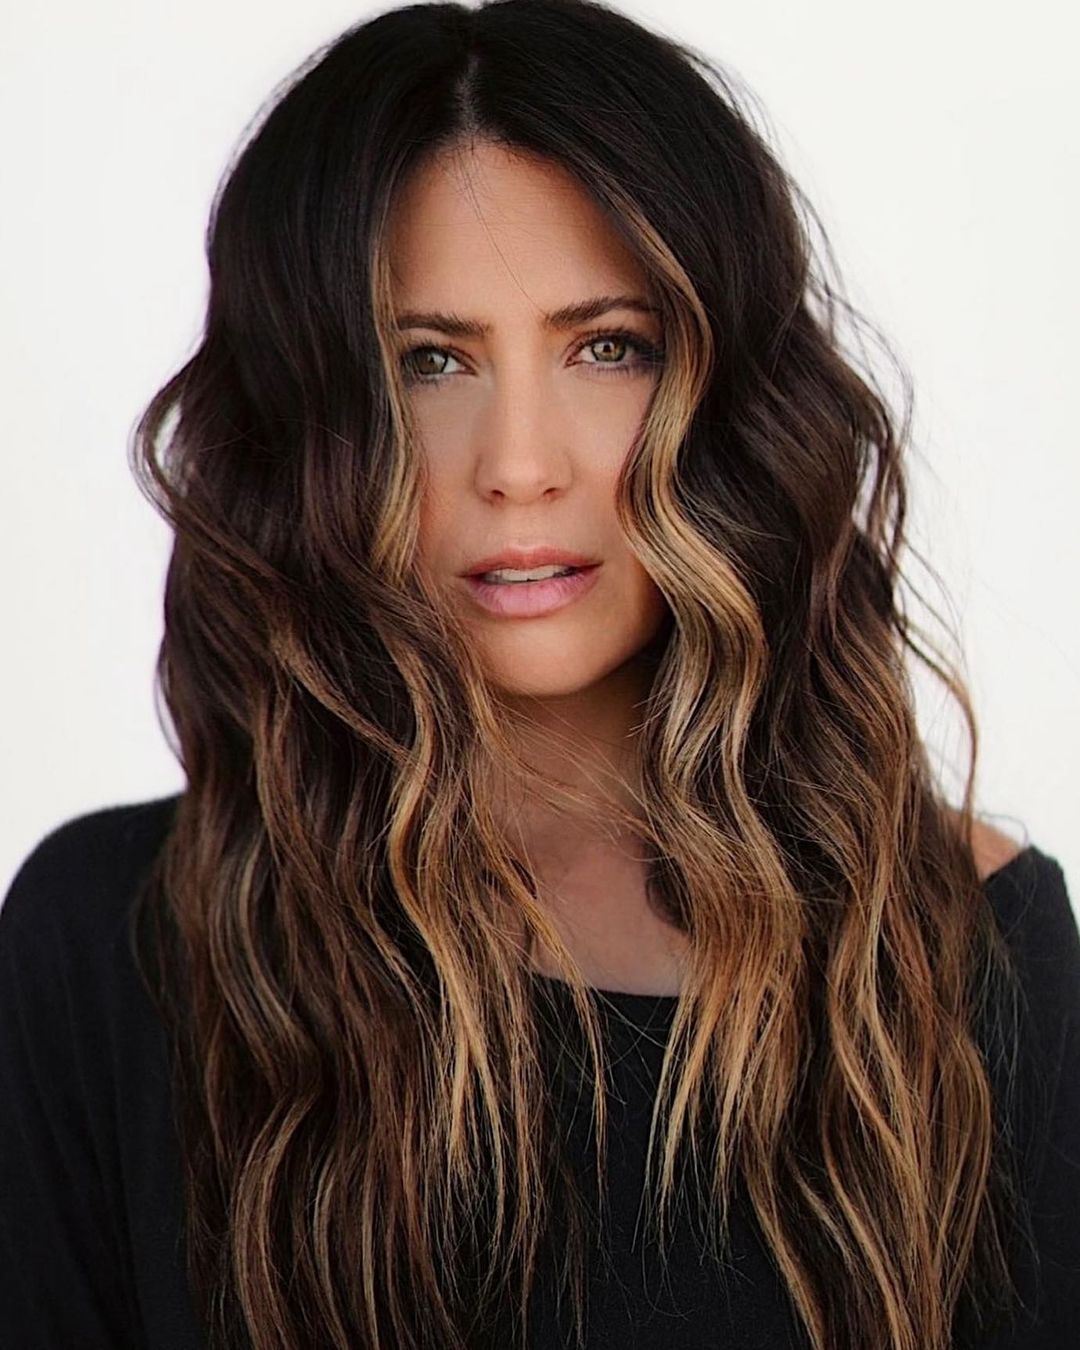 50 Awesome Long Layered Hair Ideas For 2021 images 37